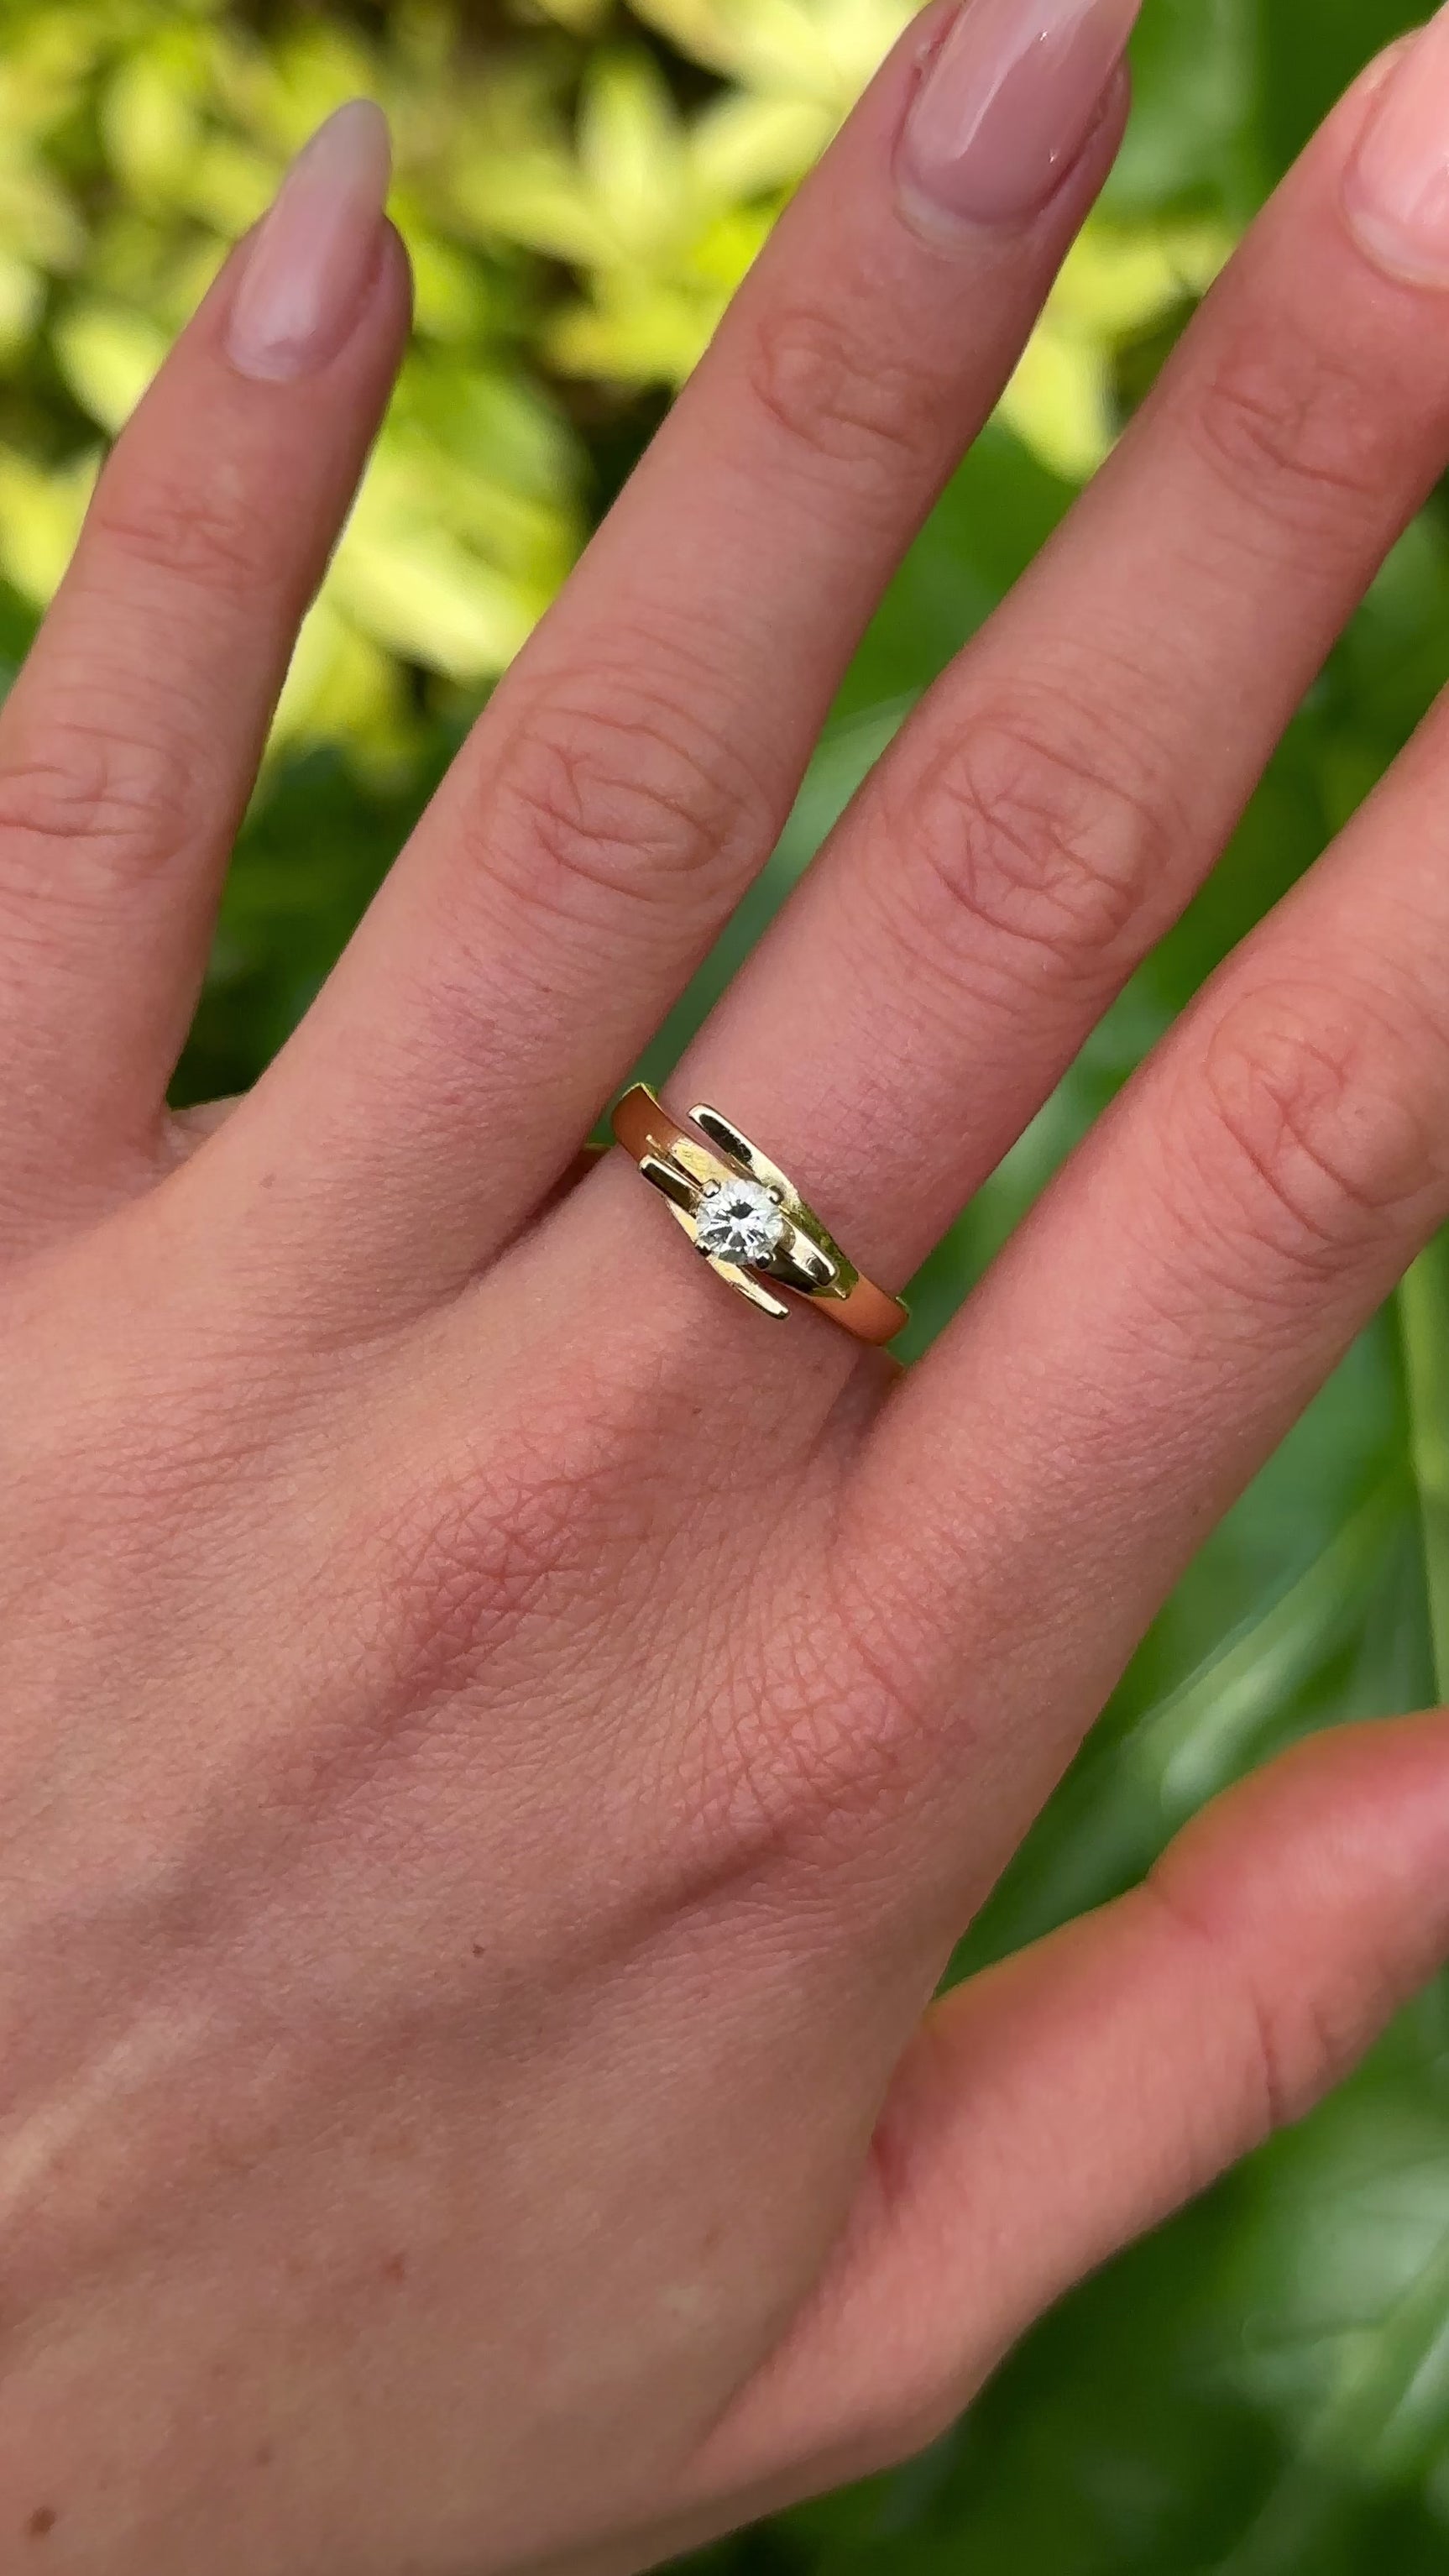 Vintage, Unique 1970s Diamond Engagement Ring, 18ct Yellow Gold worn on hand. 